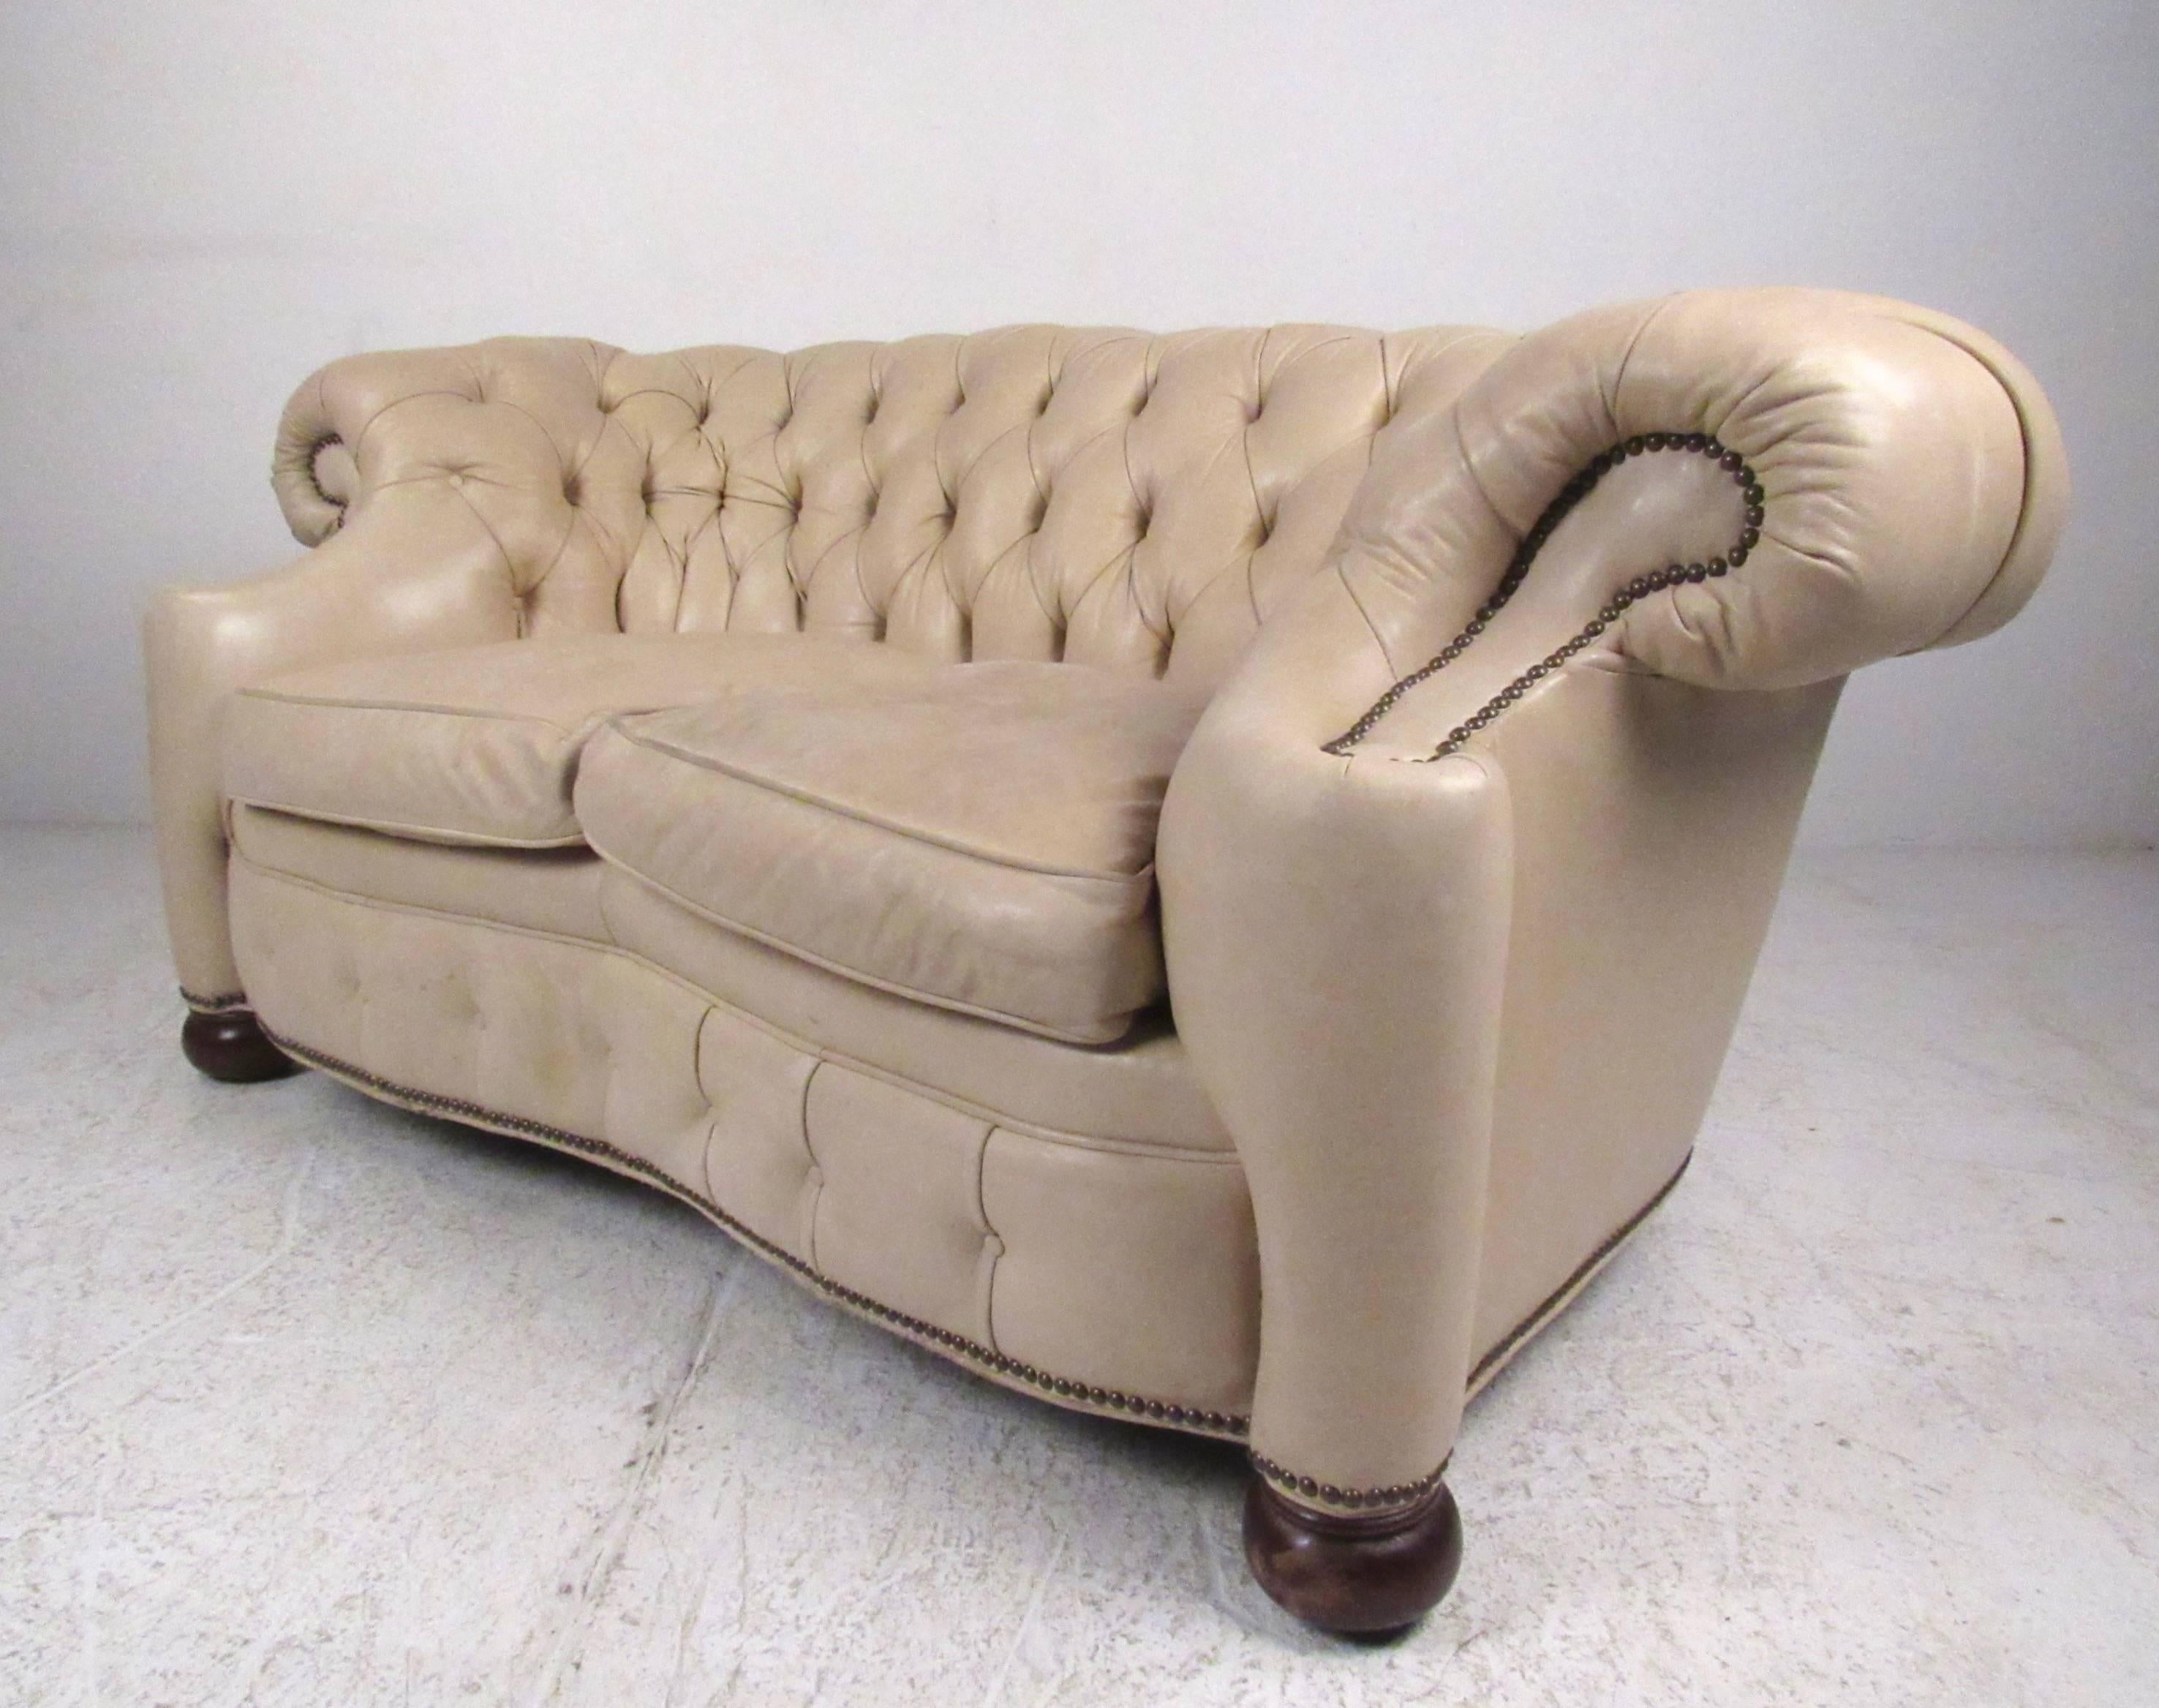 This stylish leather Chesterfield features shapely scrolled arms, tufted leather upholstery, and unique brass details. The two seat sofa by Old Hickory Tannery makes an impressive visual statement without sacrificing comfort. Please confirm item